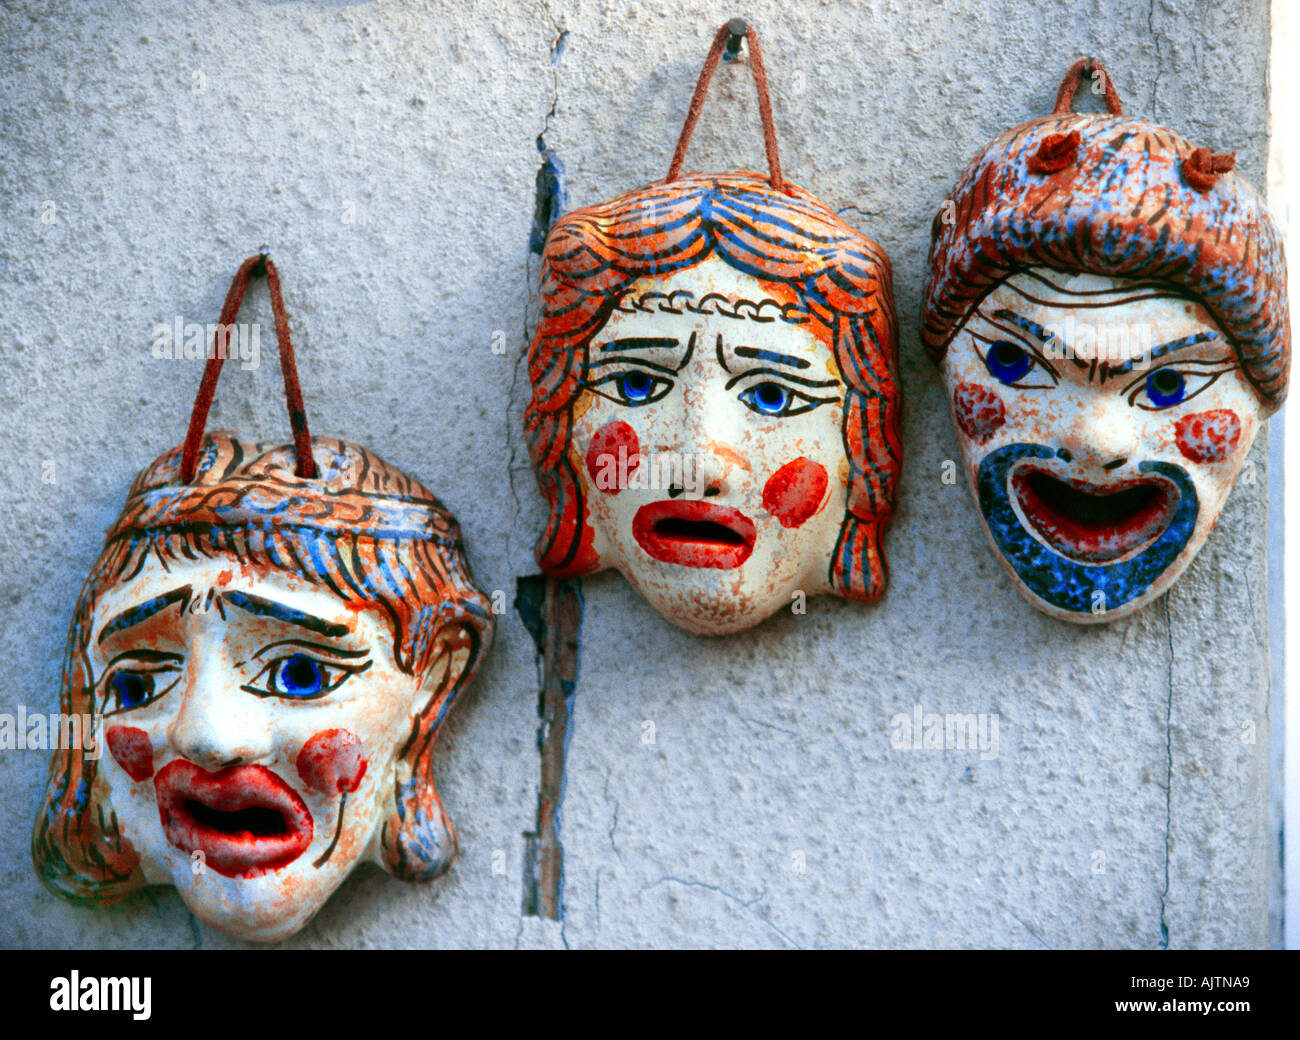 Greek Masks High Resolution Stock Photography and Images - Alamy